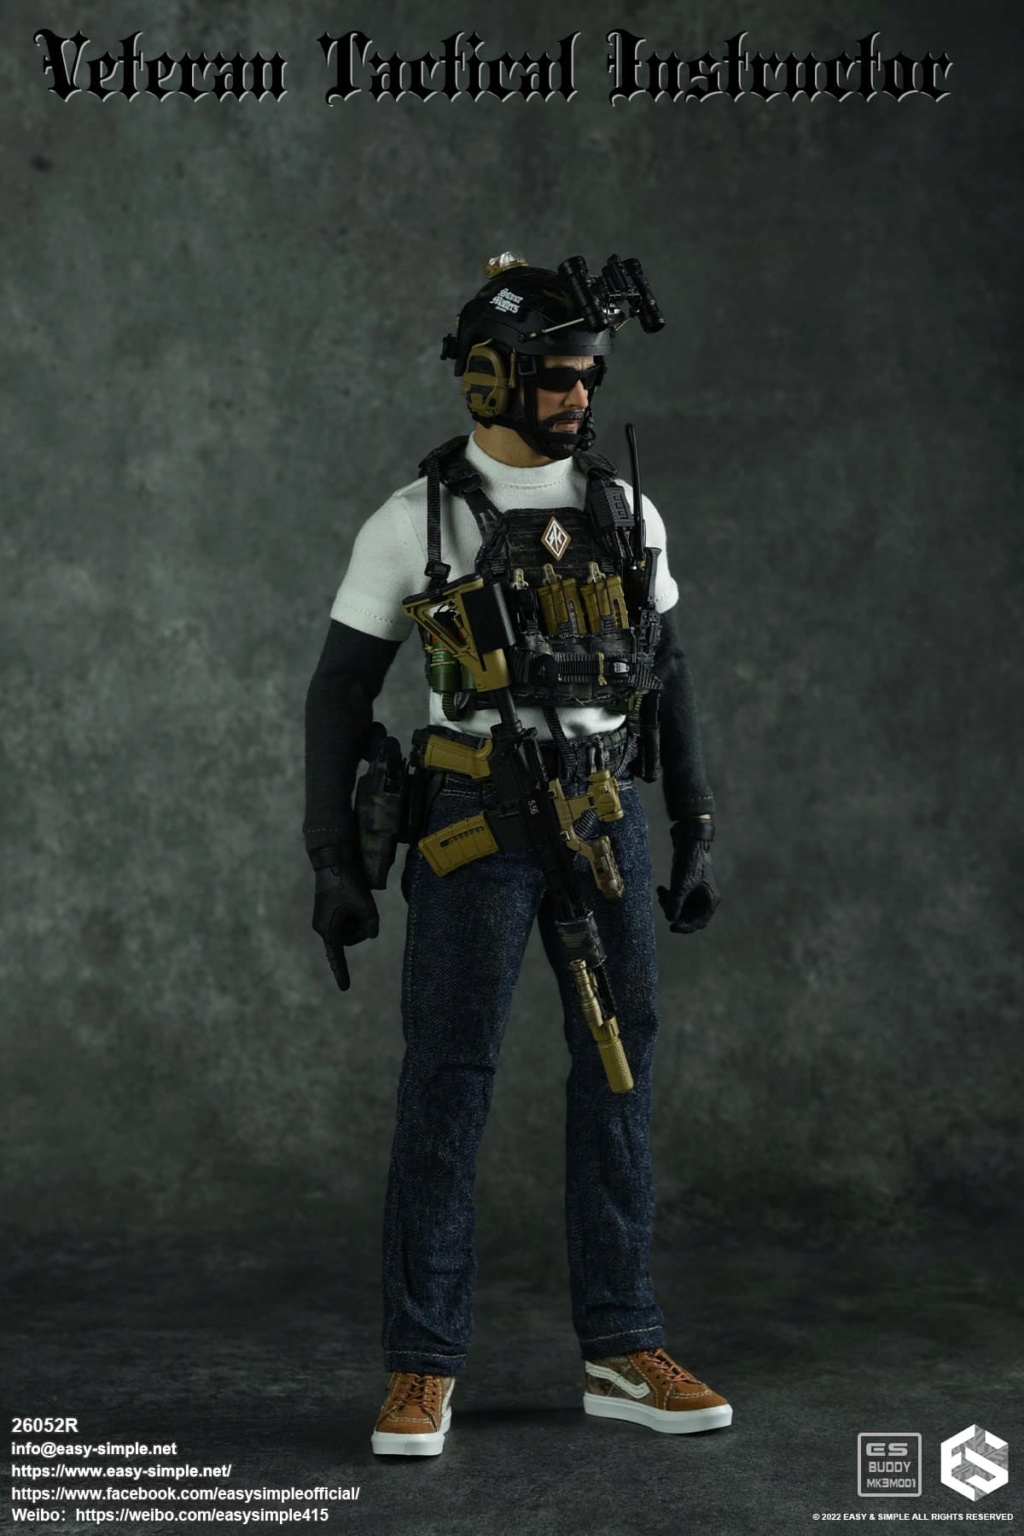 veterantacticalinstructor - NEW PRODUCT: Easy&Simple: 26052R 1/6 Scale Veteran Tactical Instructor 31158510